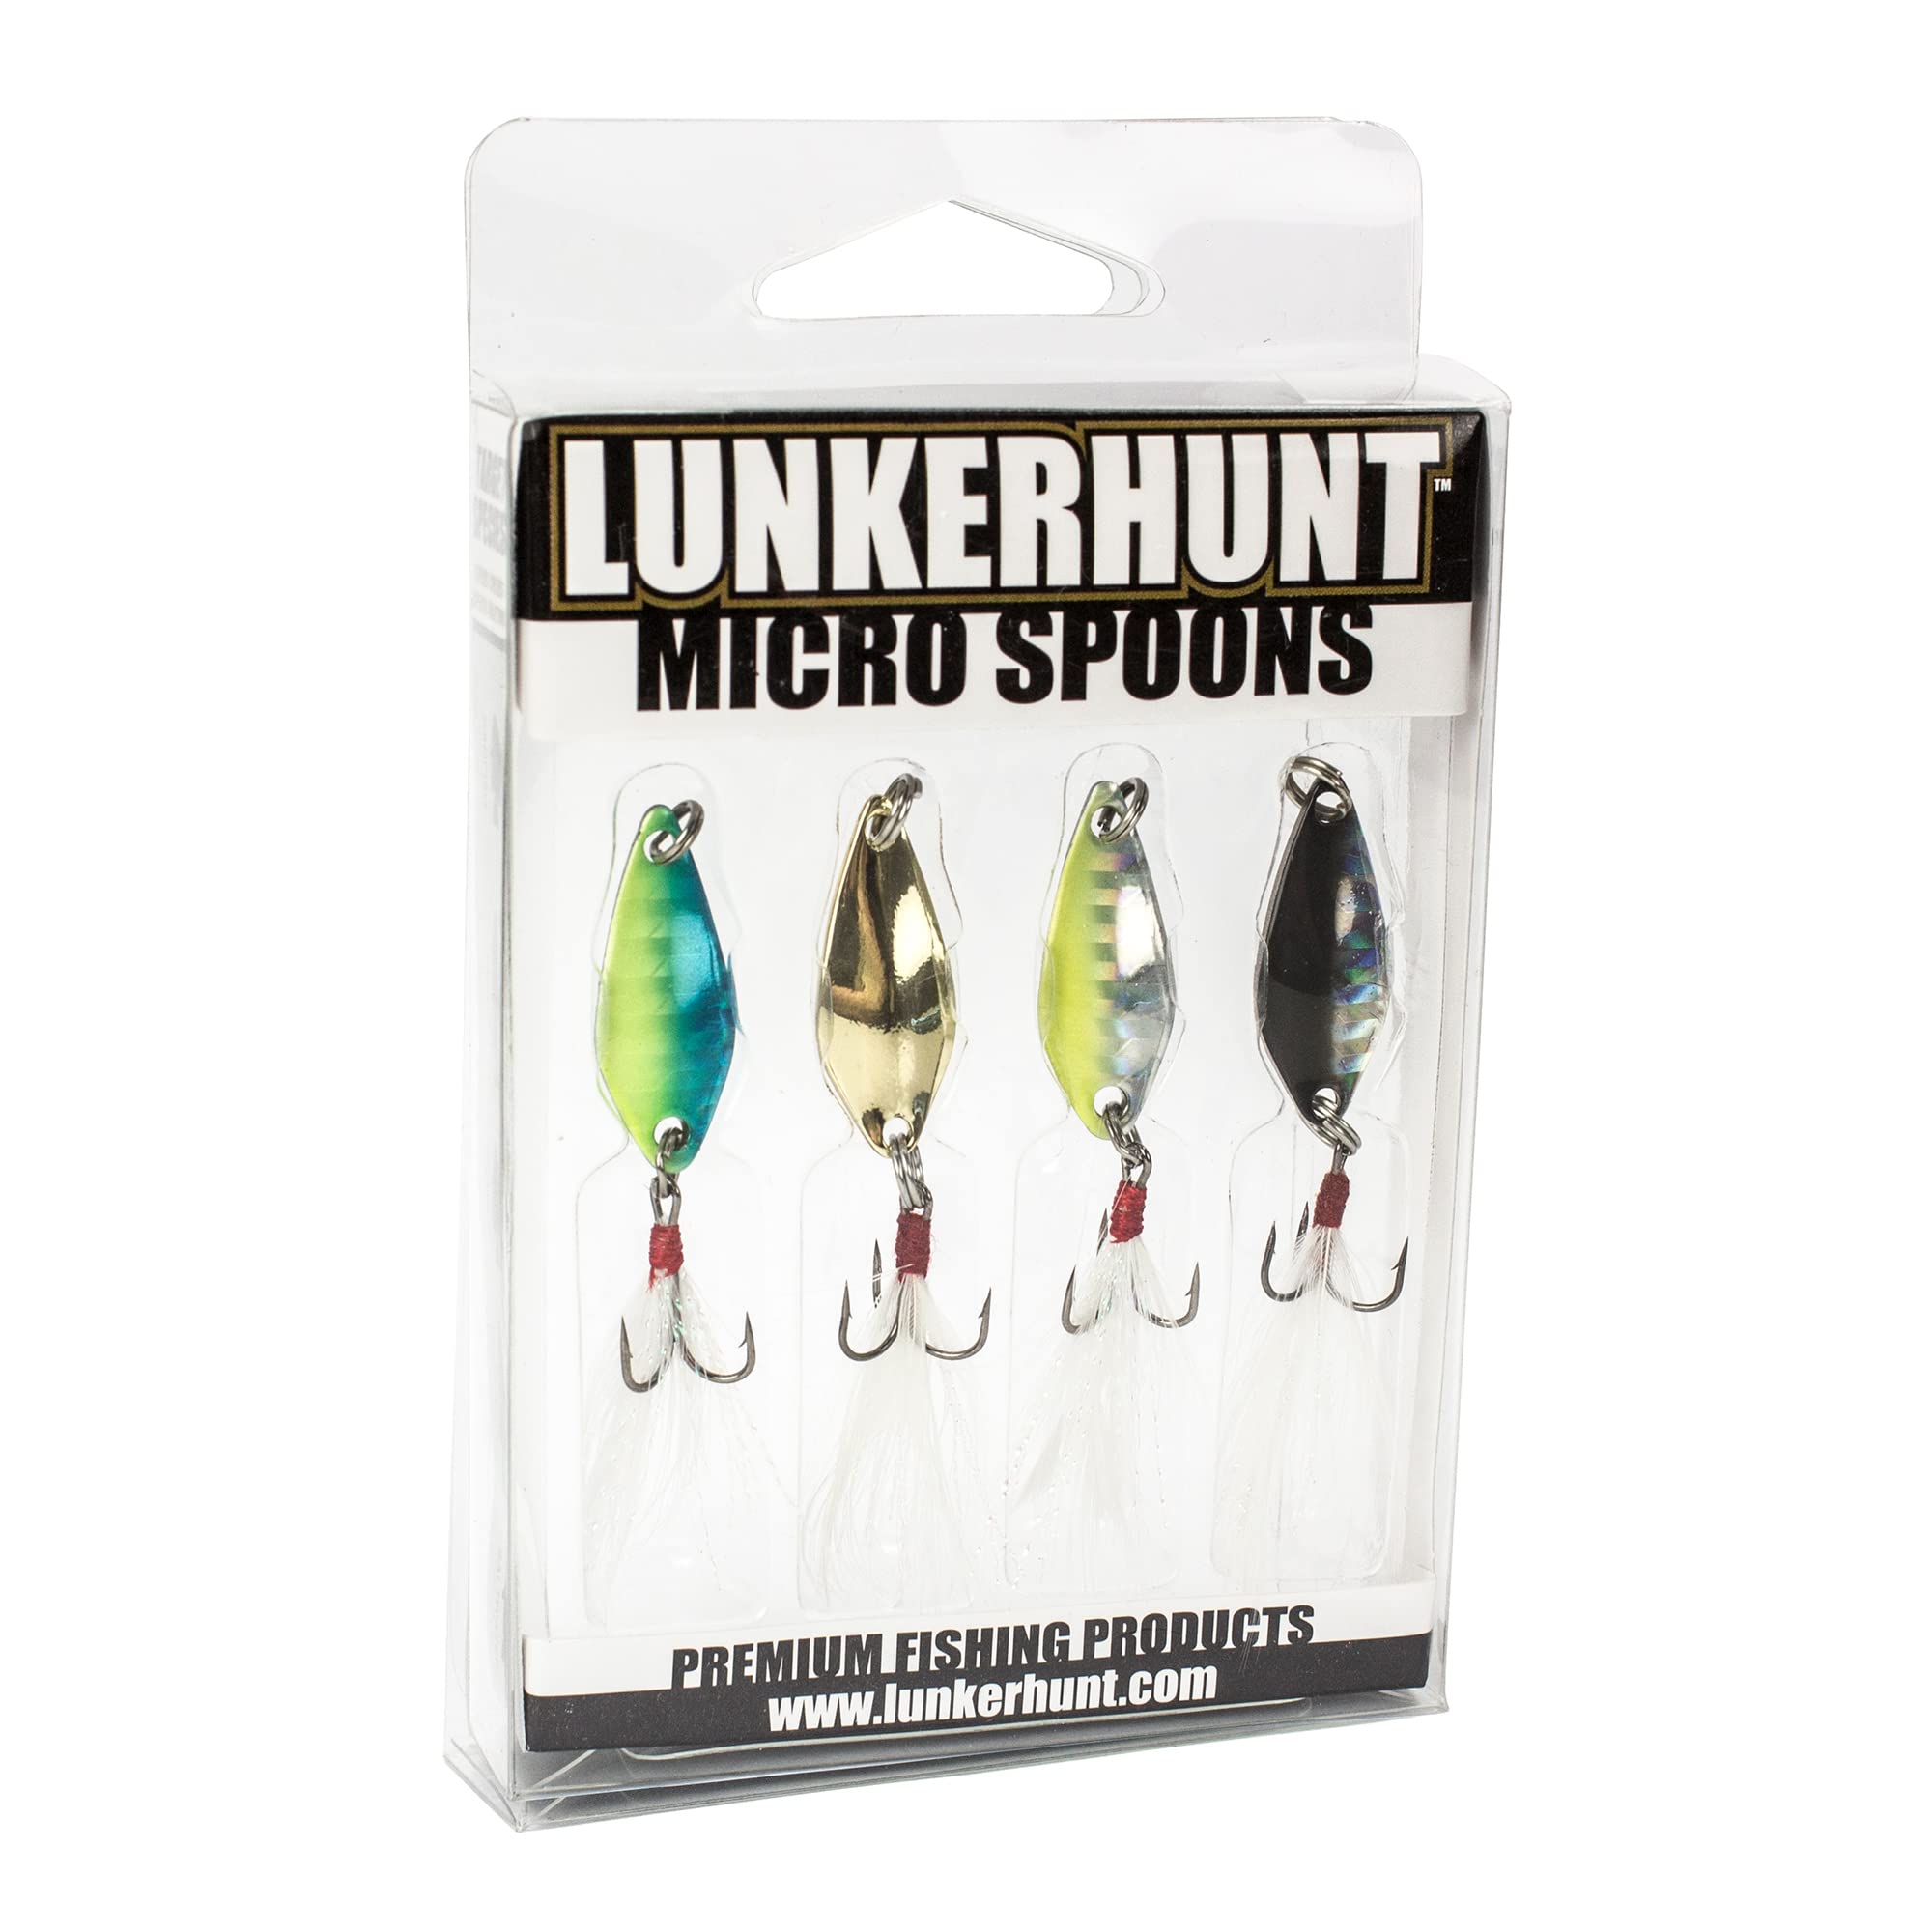  Lunkerhunt Micro Spoon Fishing Lures (4-Pack) Spoon Fishing  Bait Saltwater For Bass Fishing And Trout Fishing Spoons Lures